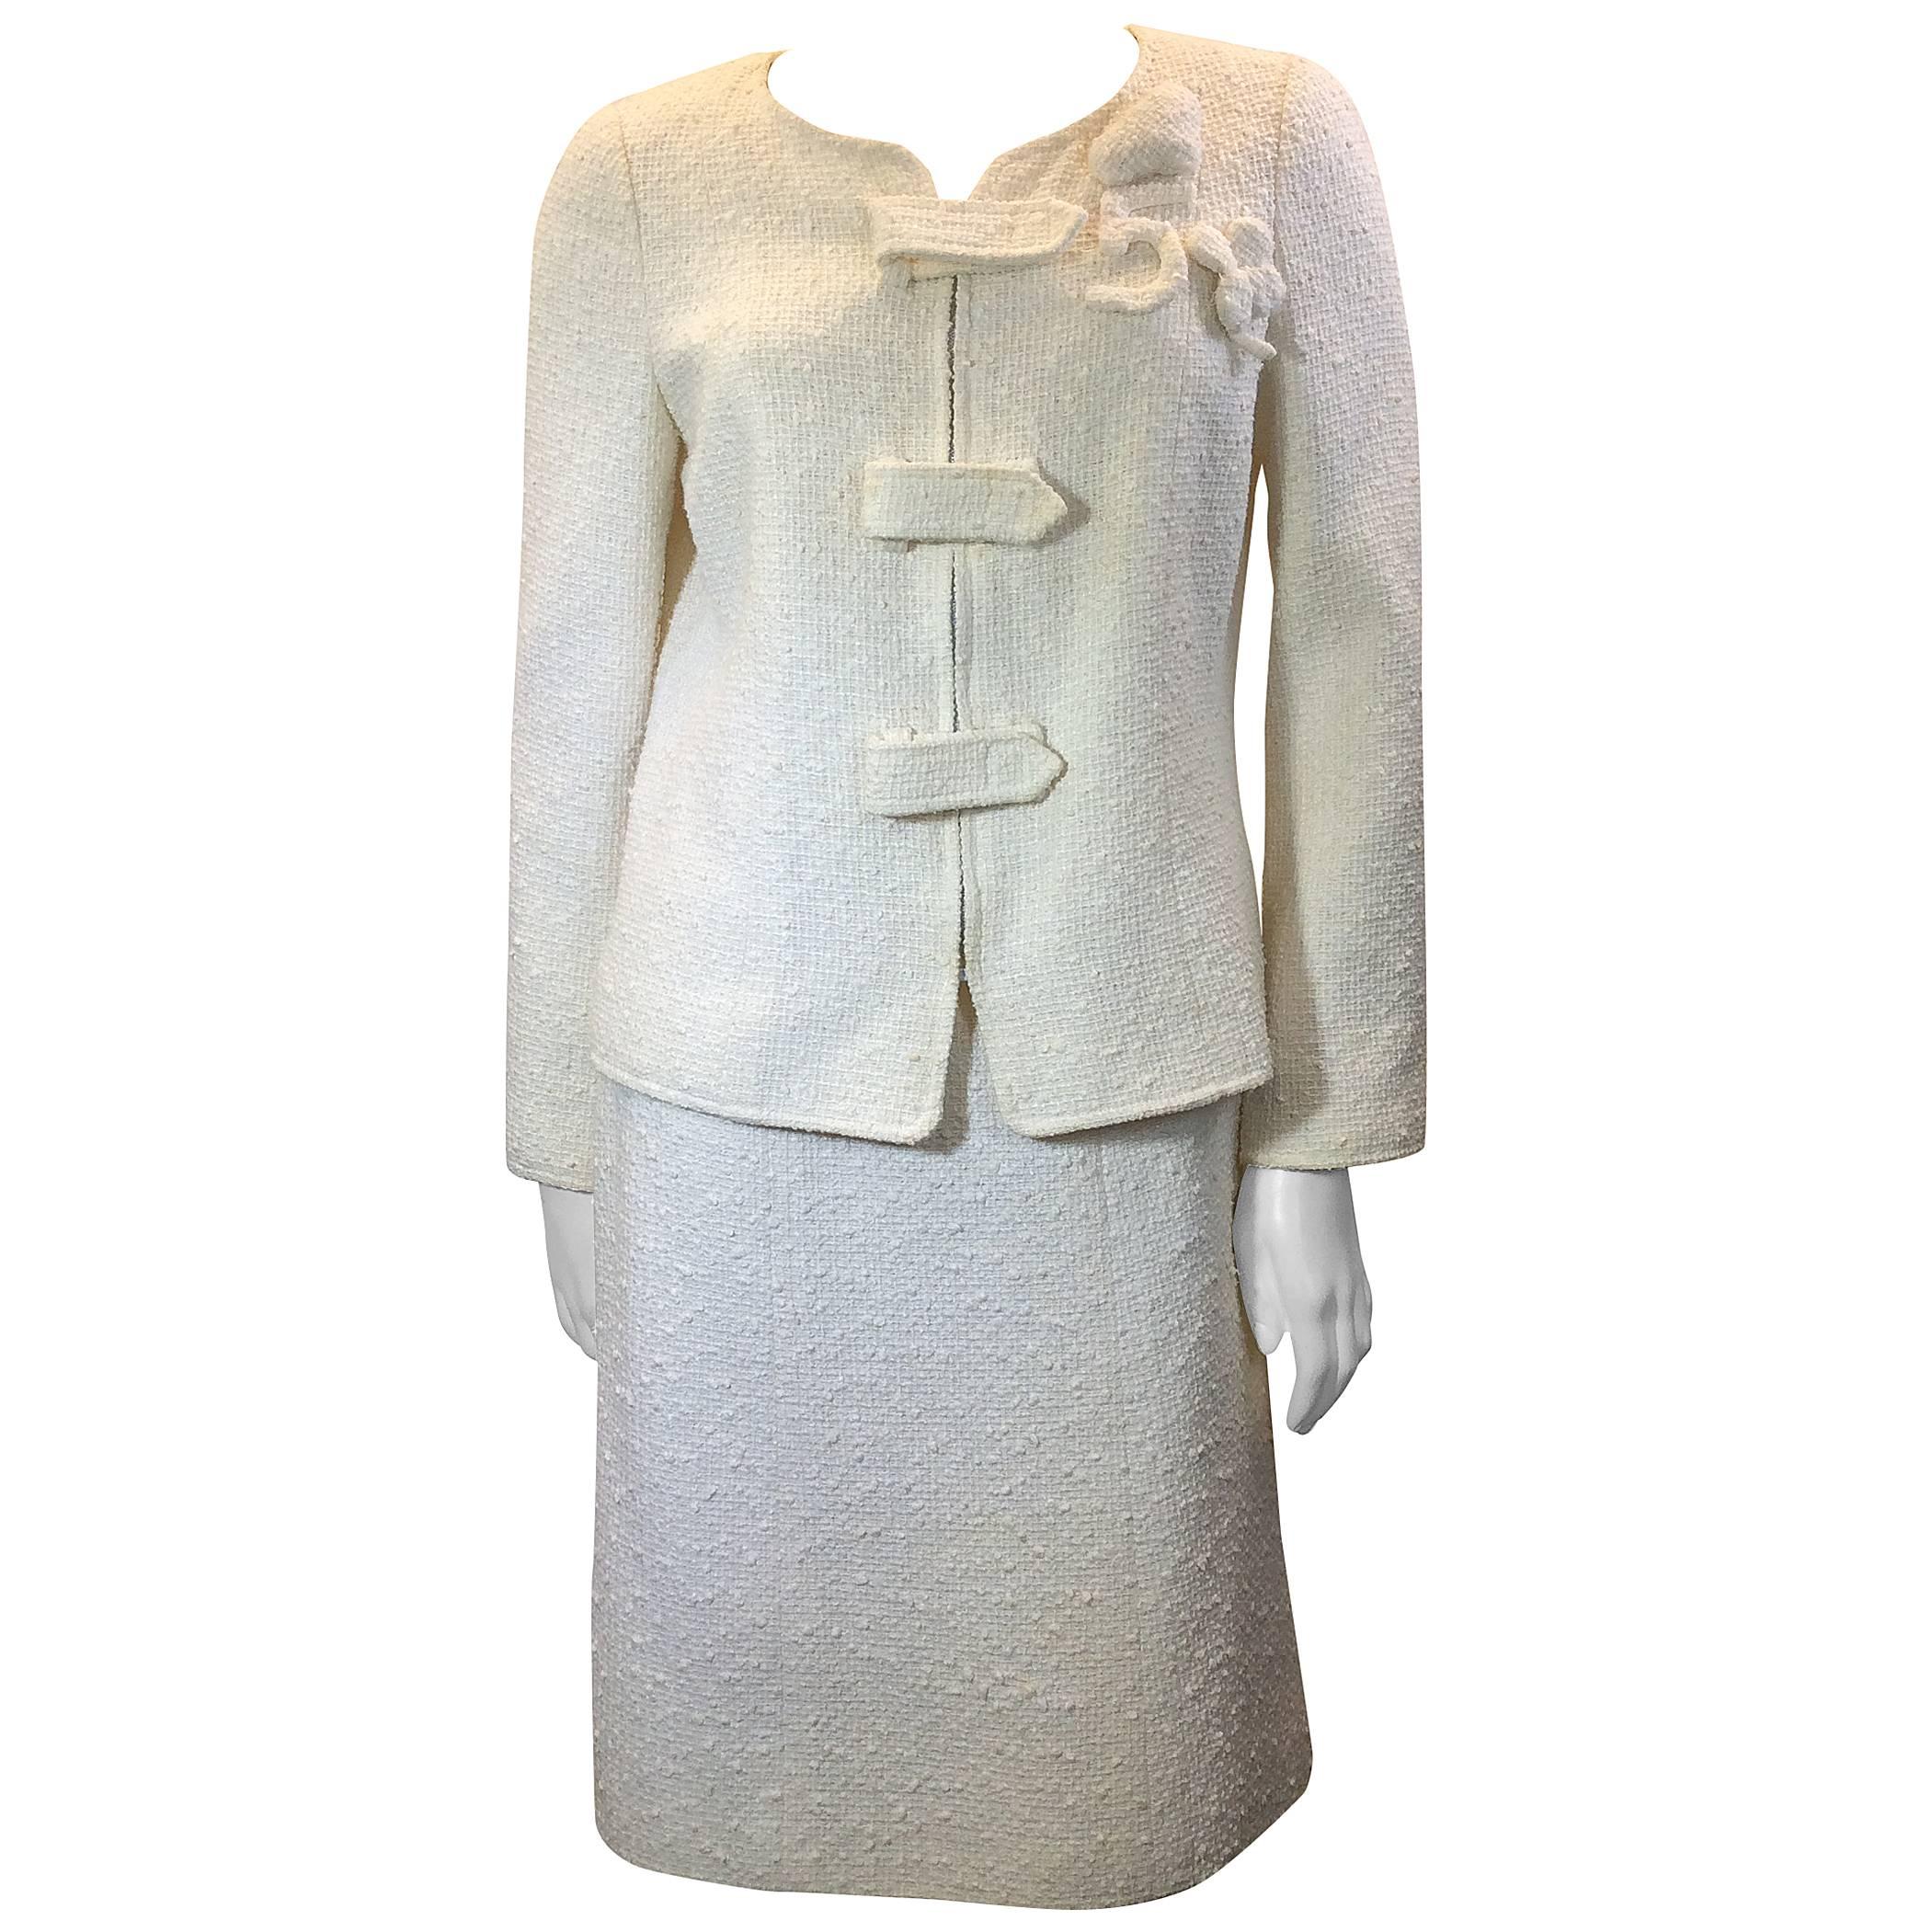 Chanel Winter White 2 Piece Skirt Suit  For Sale